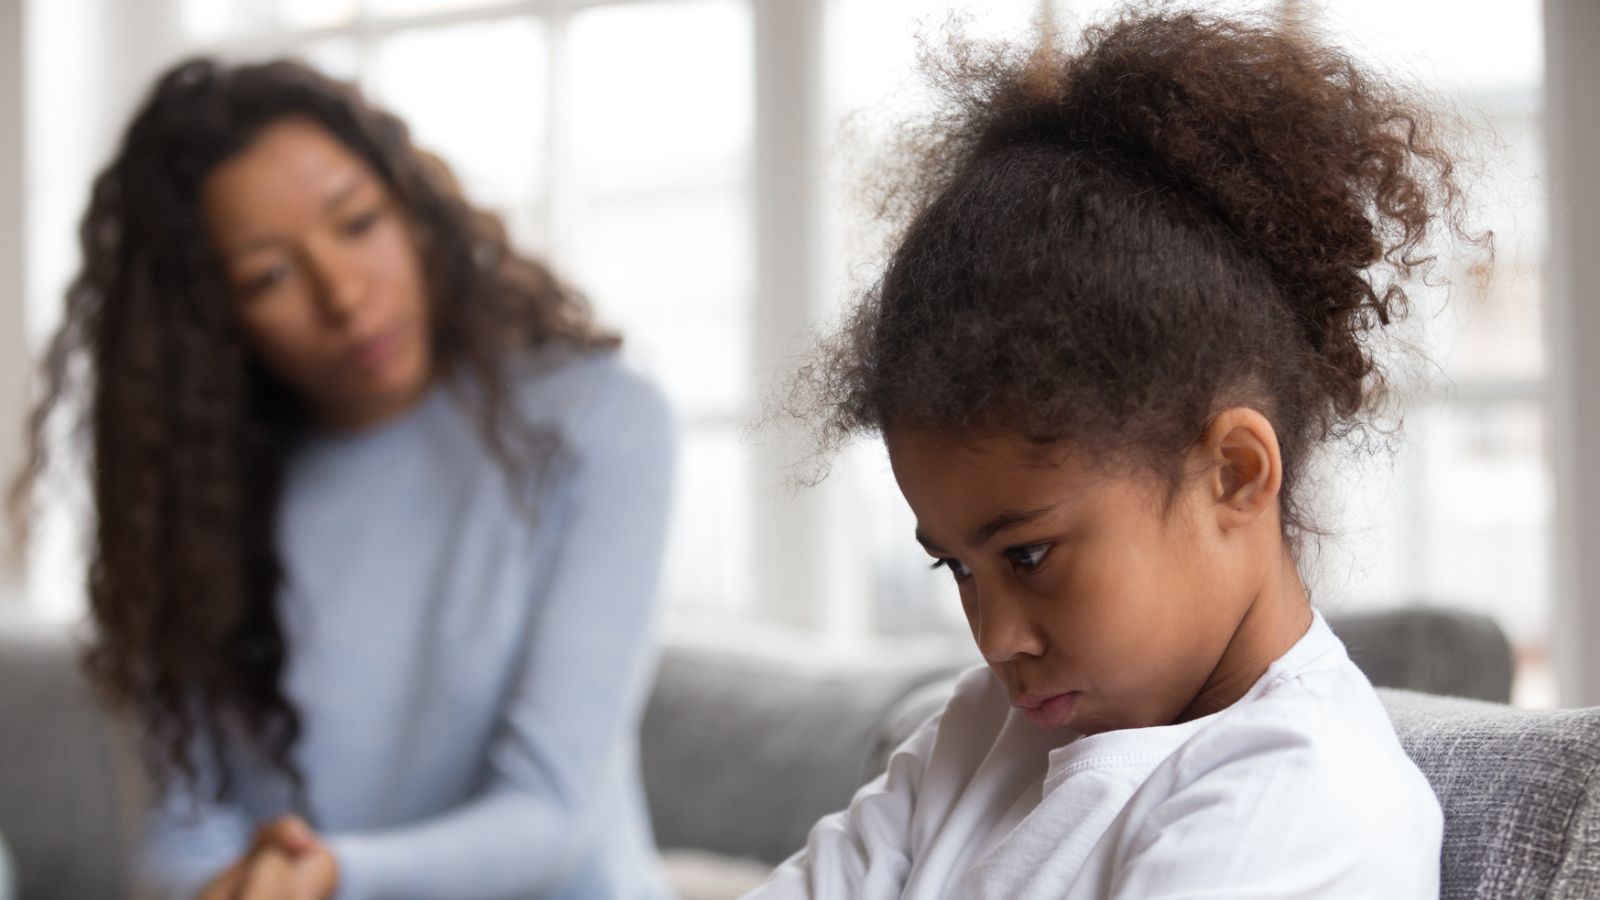 <p>Every generation will think the one before them and the one after them are doing it wrong. Being a parent is one of the most criticized jobs, with more unsolicited advice than we need. But here are 18 things we may want to take into consideration to not fail our kids.</p>